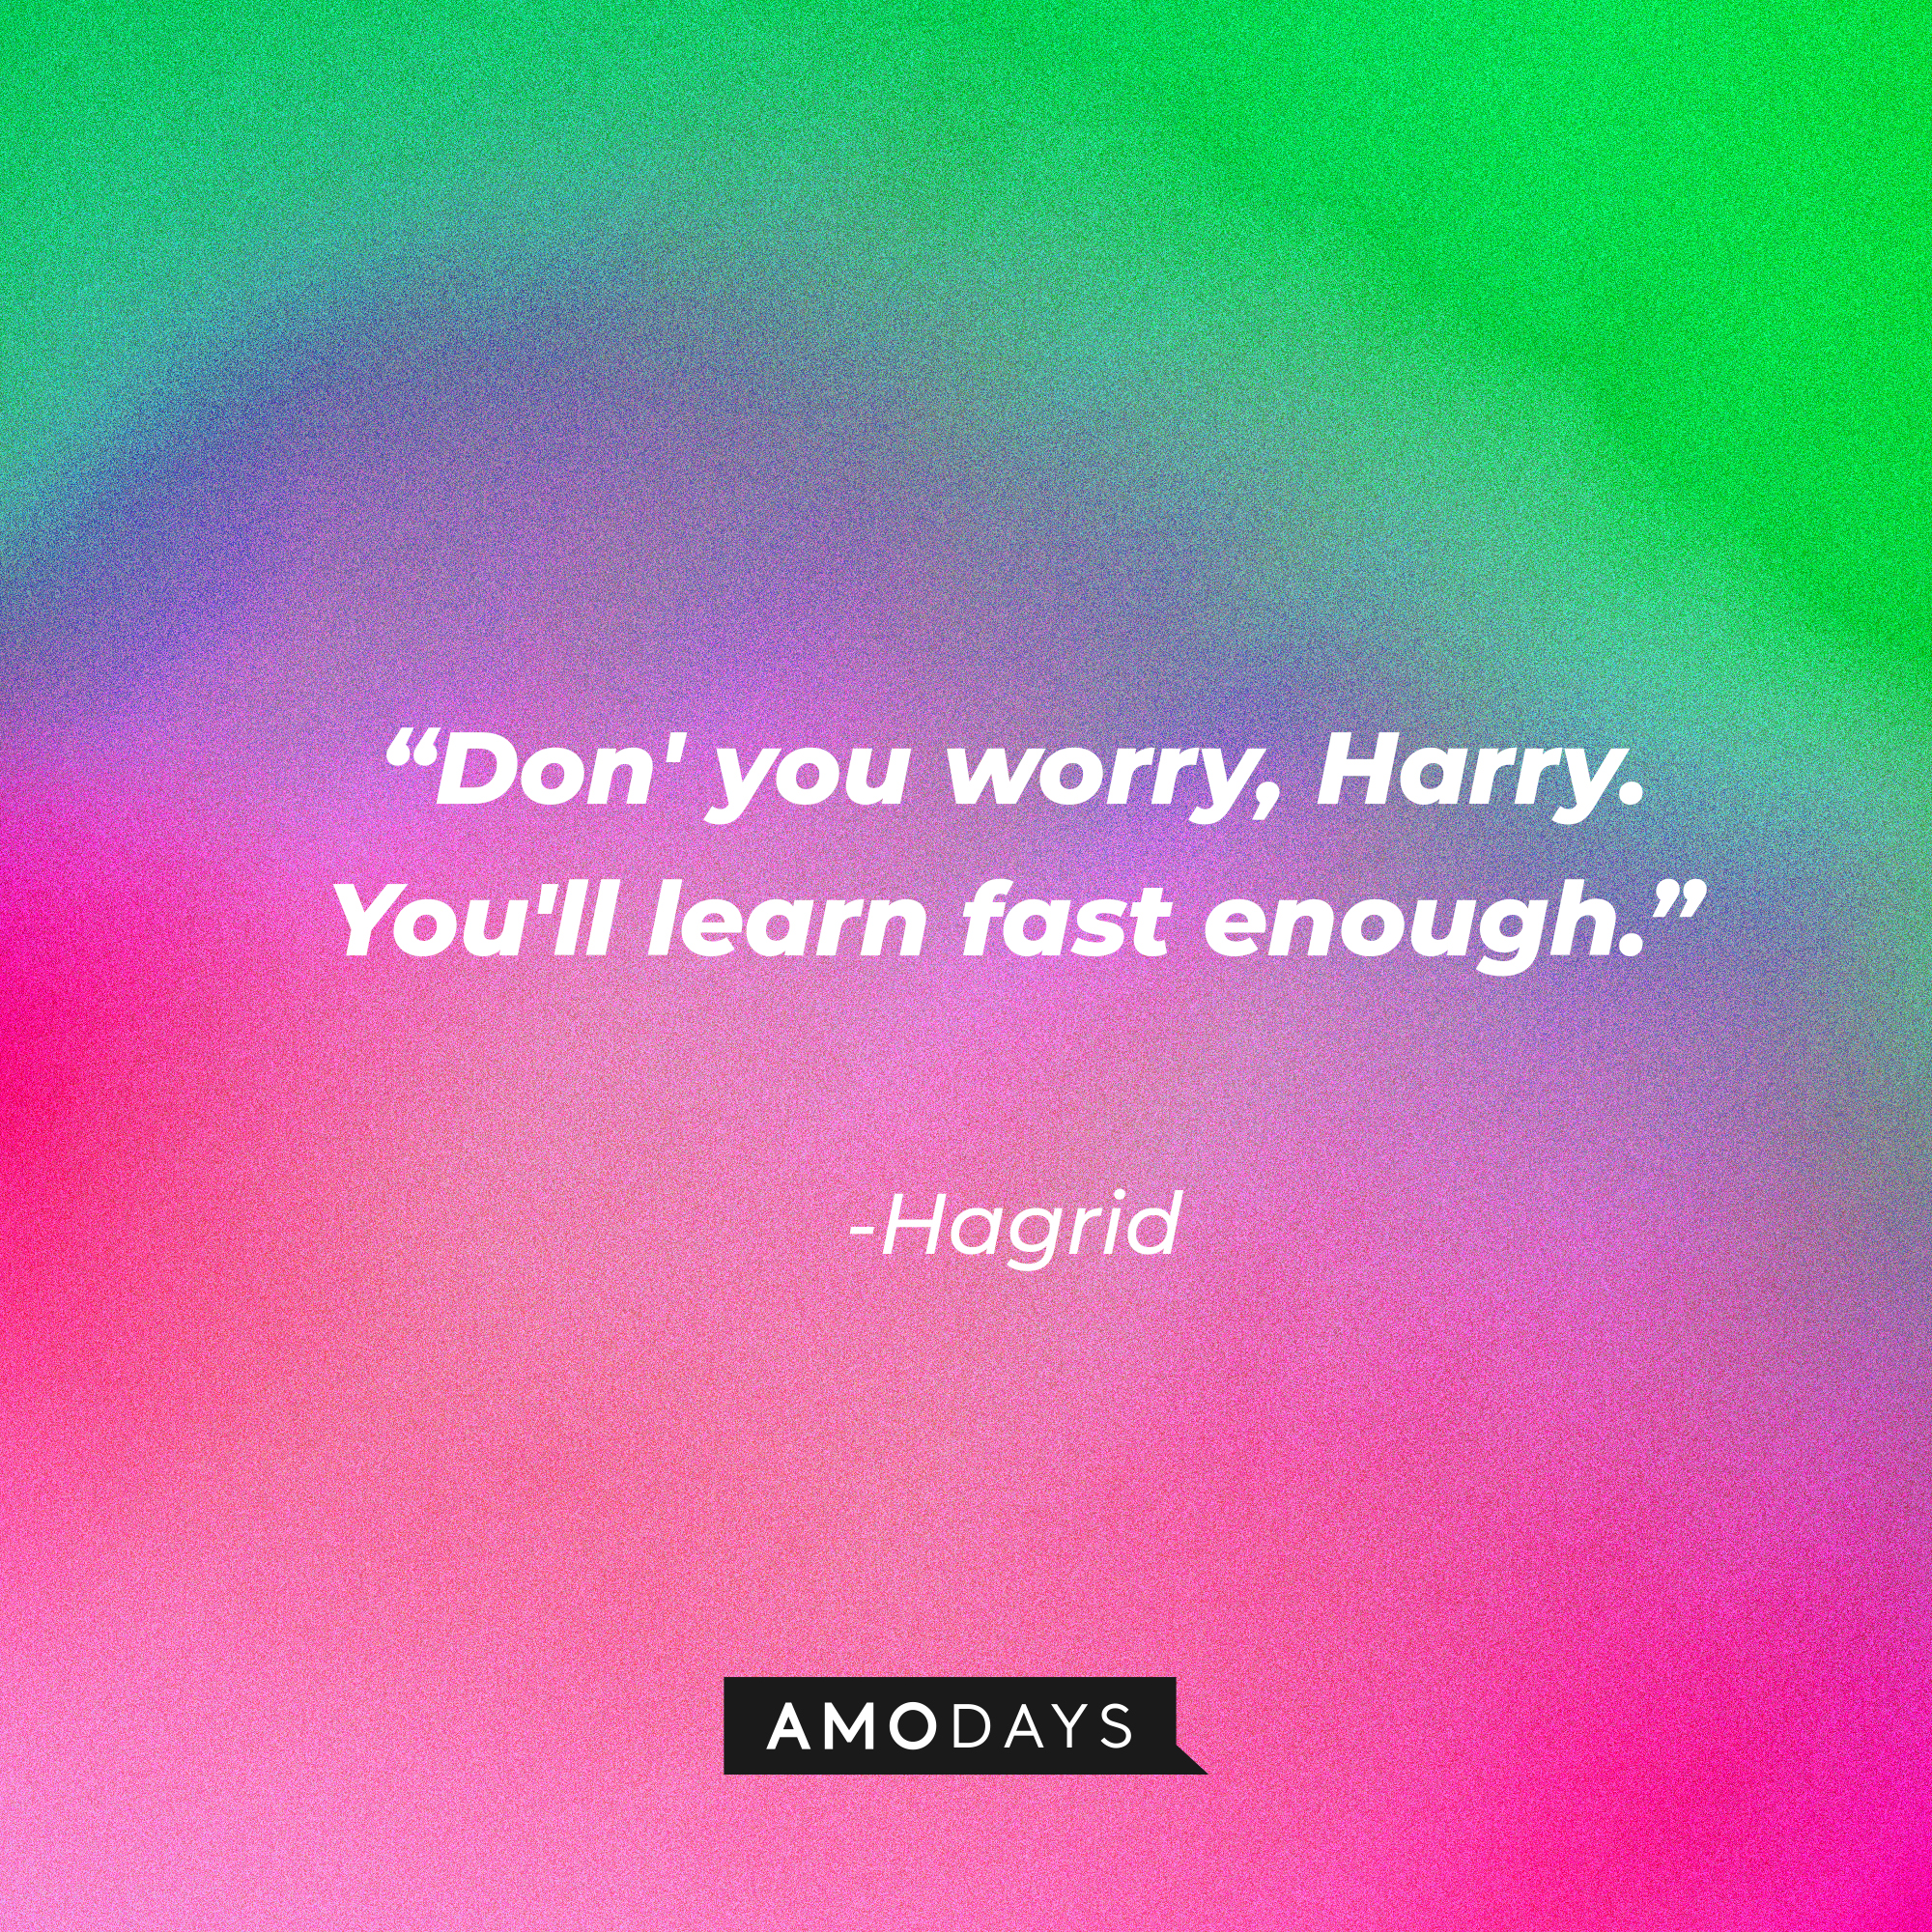 Hagrid's quote: "Don' you worry, Harry. You'll learn fast enough." | Source: AmoDays